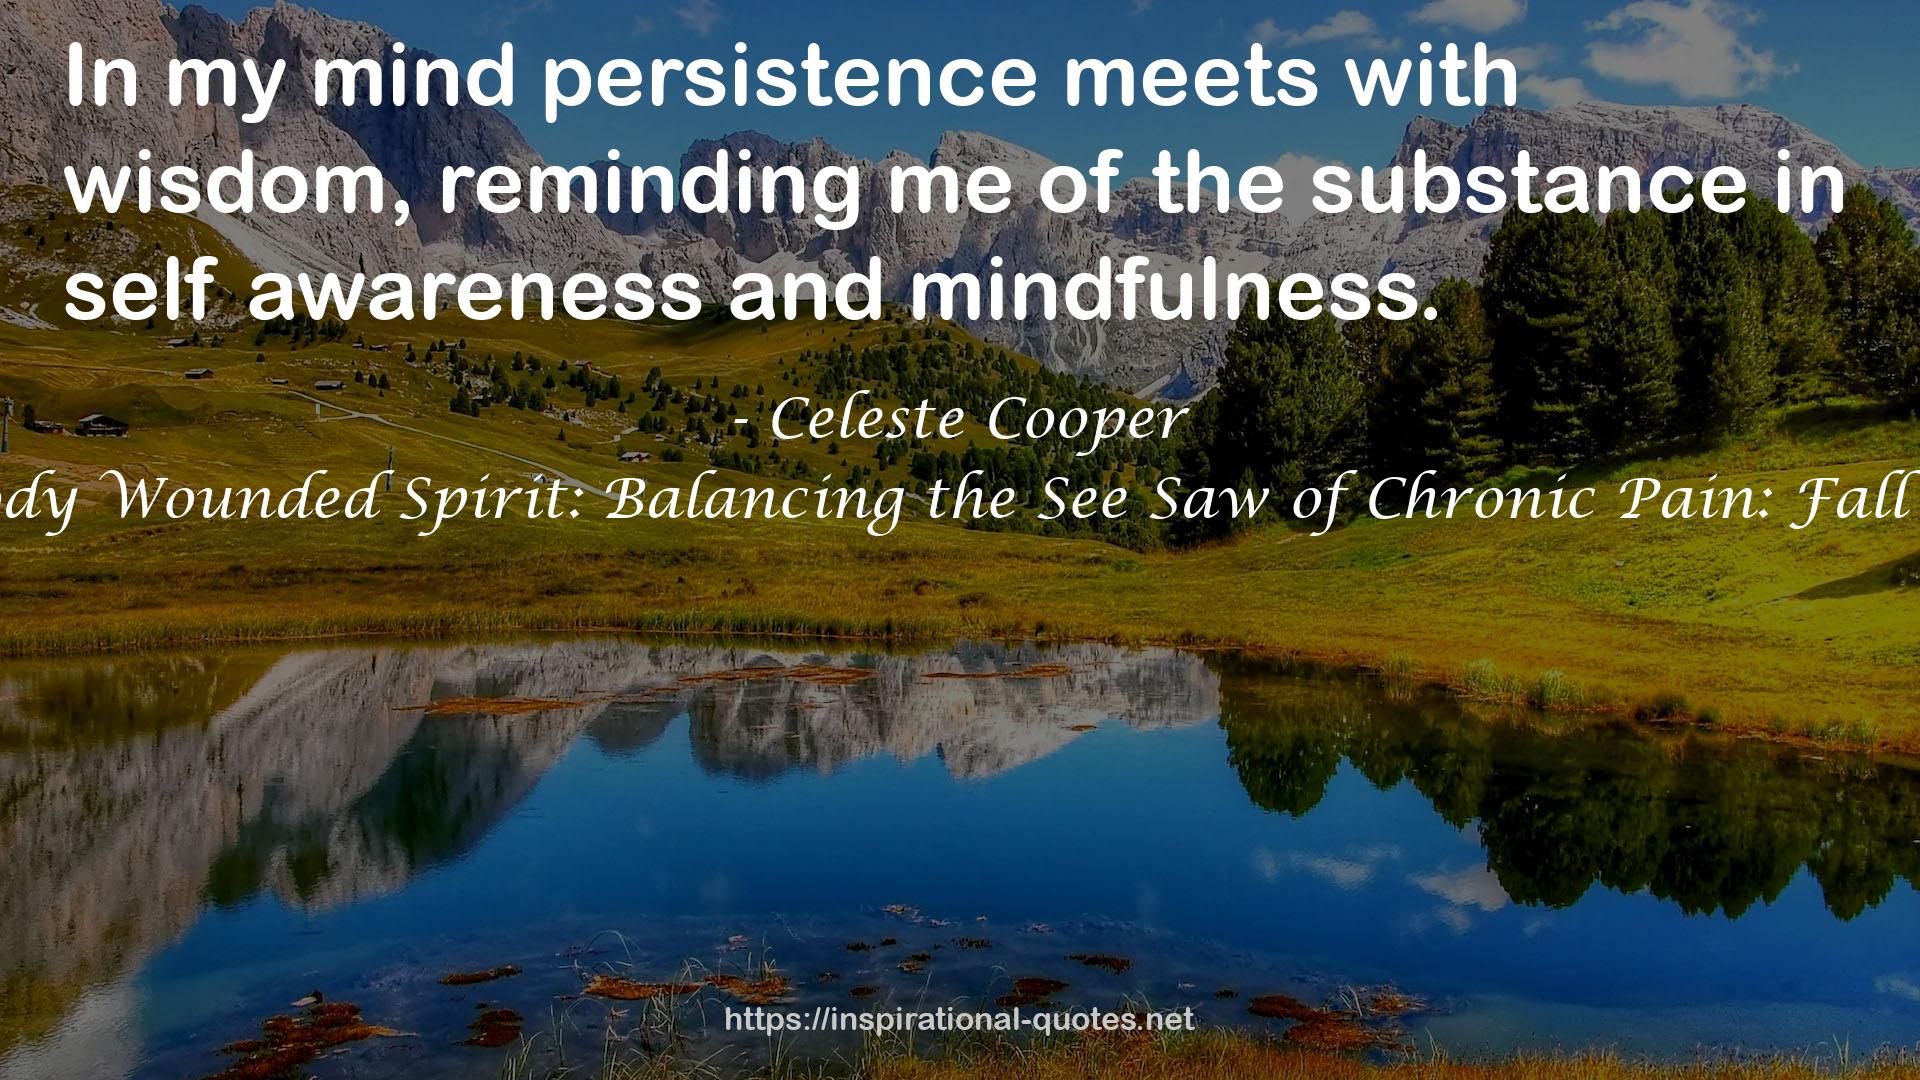 Broken Body Wounded Spirit: Balancing the See Saw of Chronic Pain: Fall Devotions QUOTES